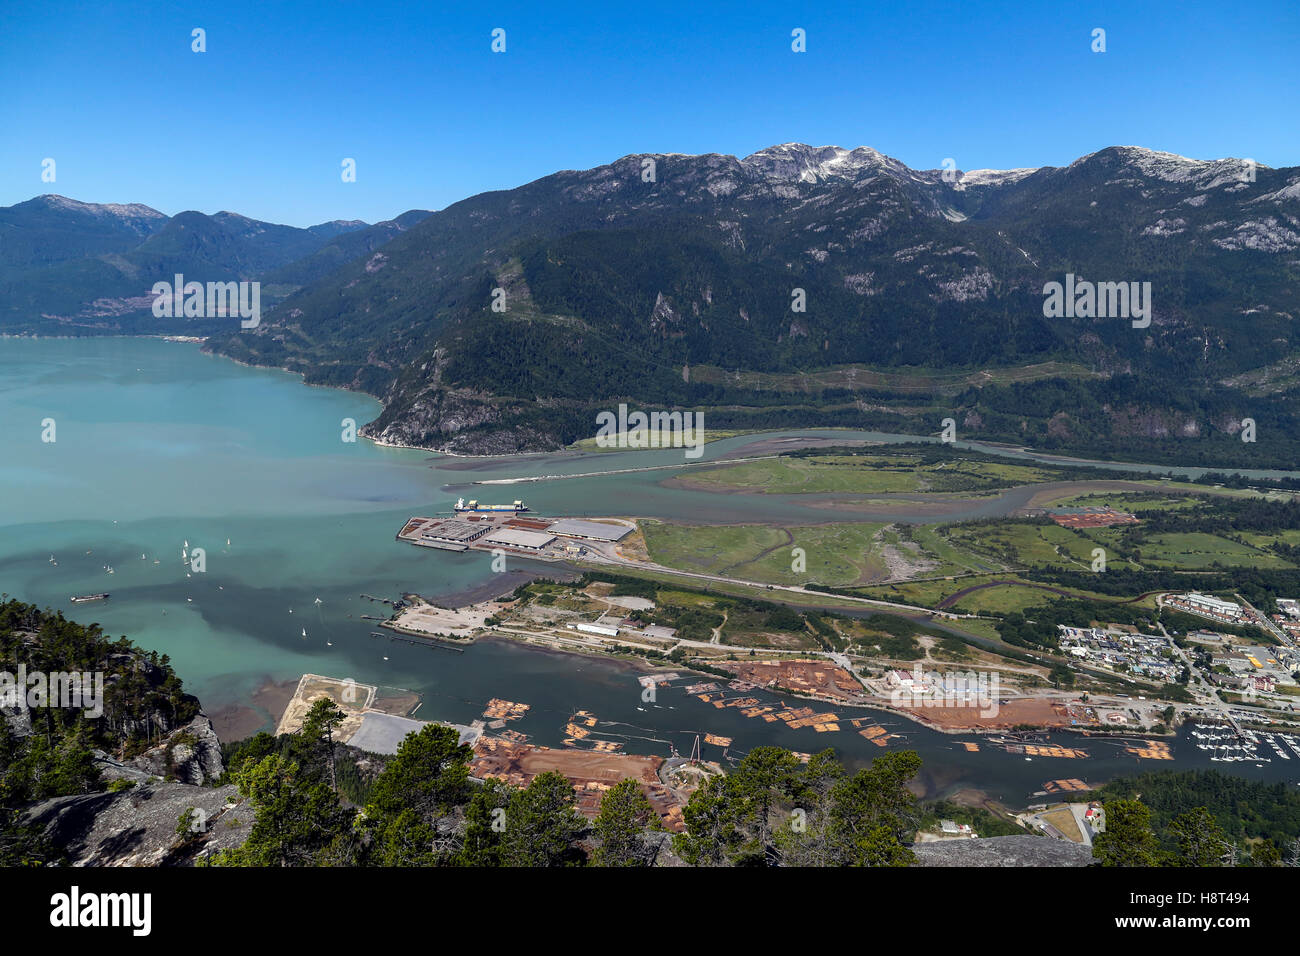 View of South Squamish from the Stawamus Chief Stock Photo